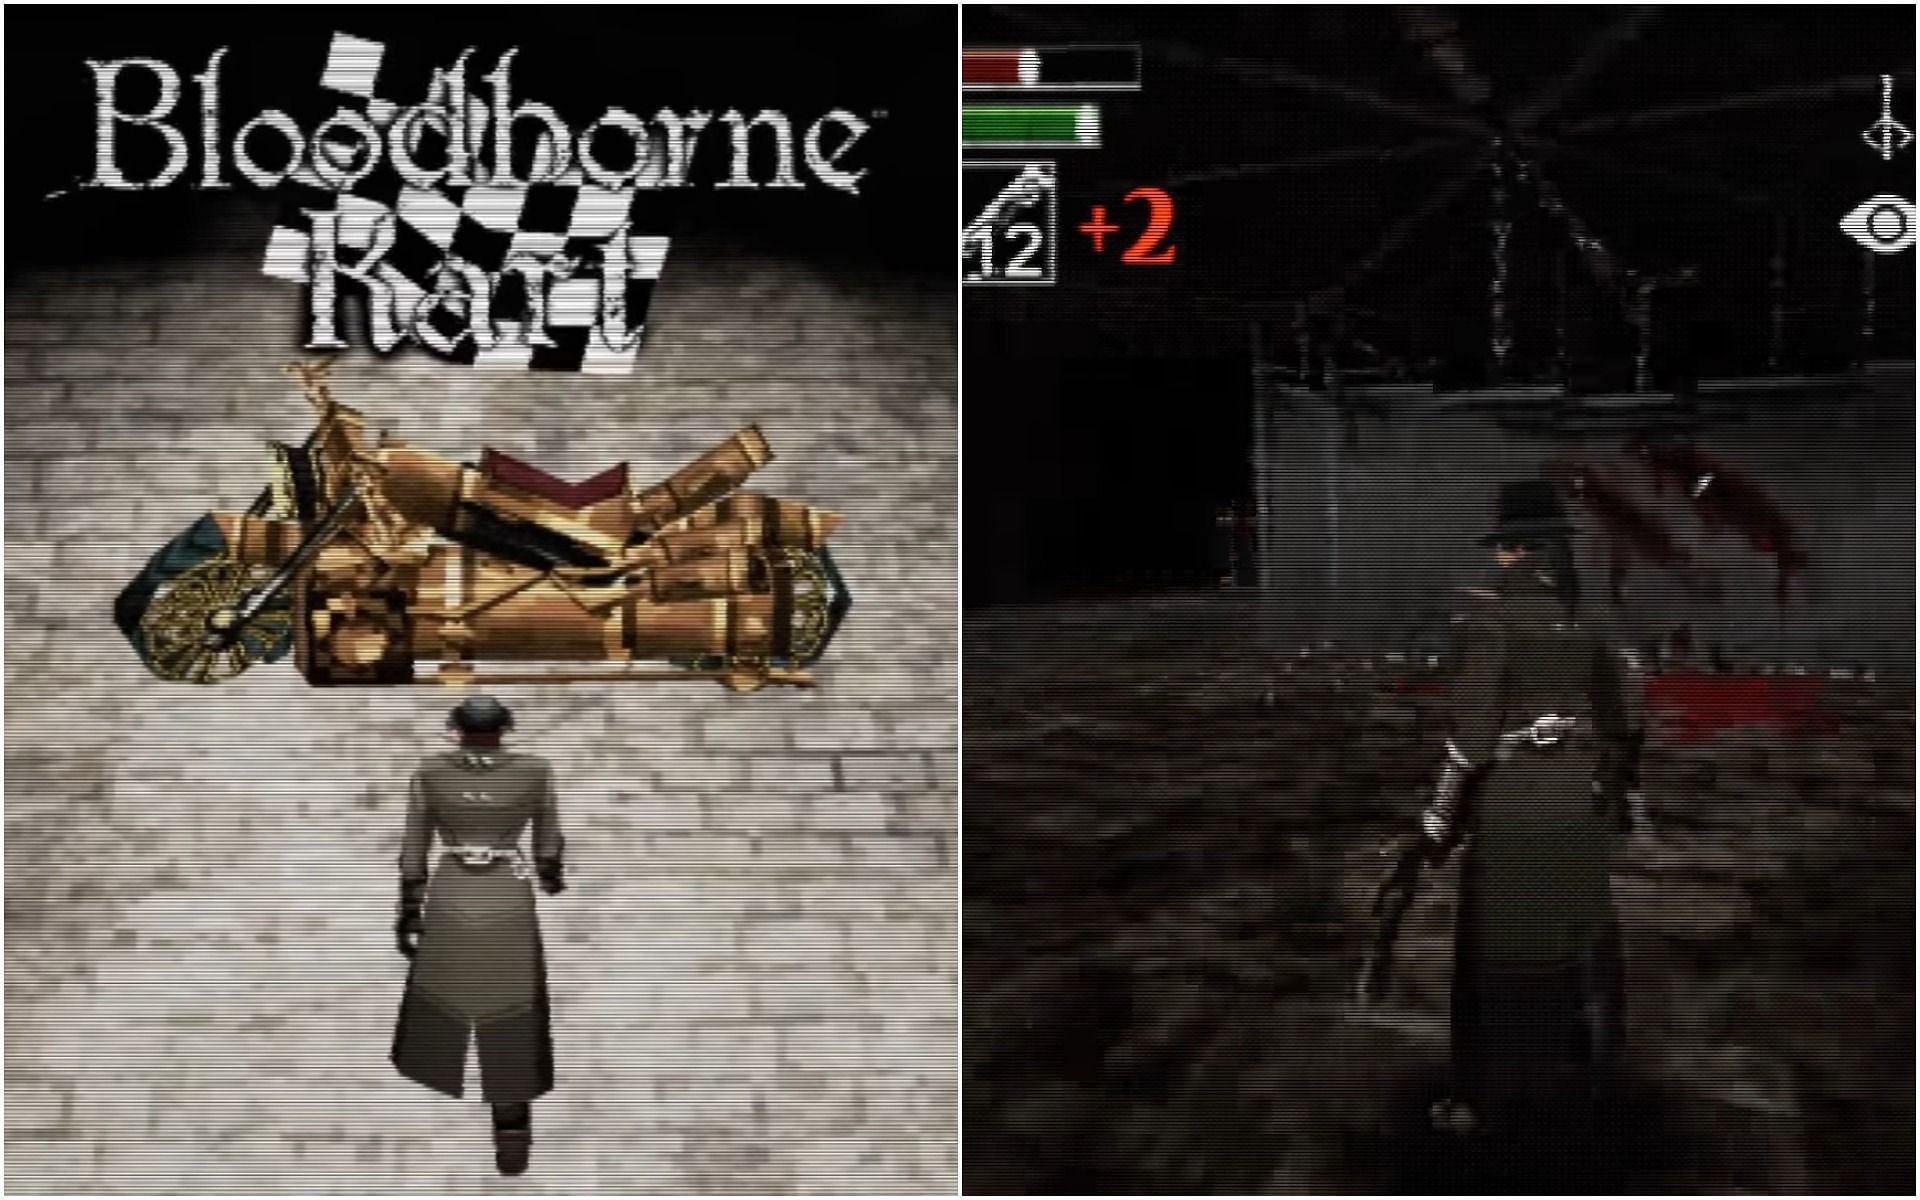 Bloodborne finally comes to PC as a PSX demake